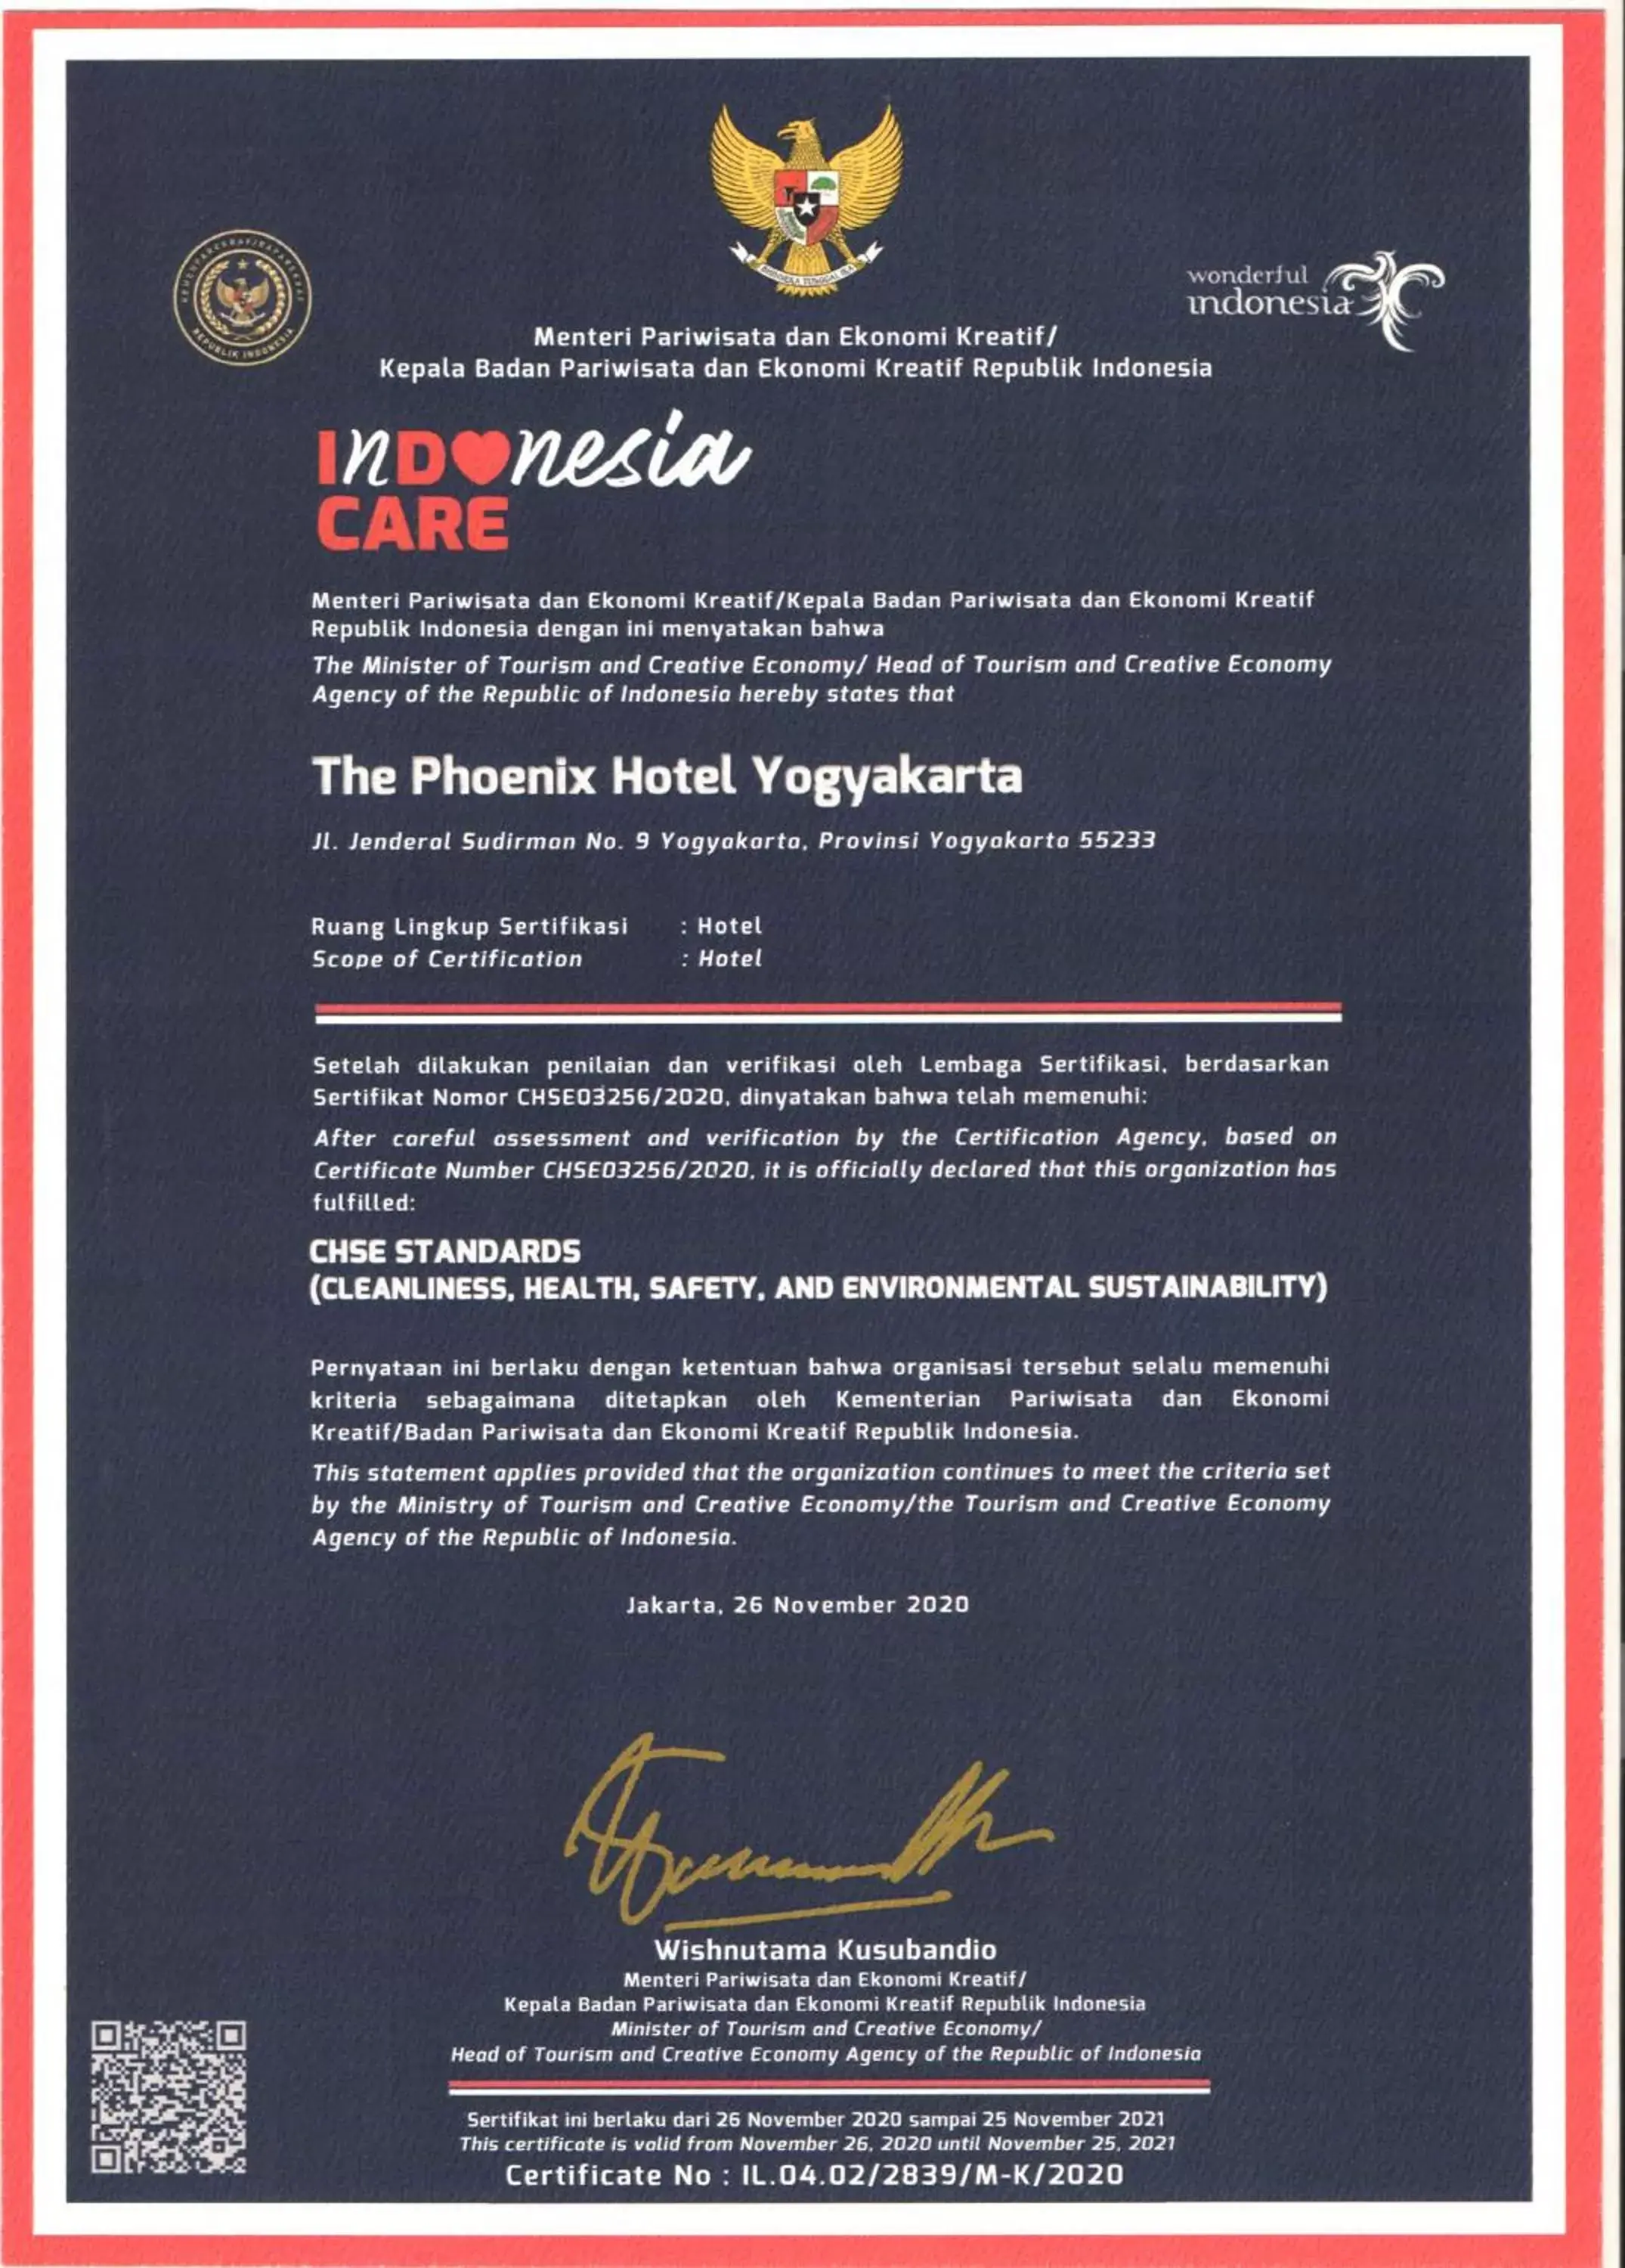 Certificate/Award in The Phoenix Hotel Yogyakarta - MGallery Collection